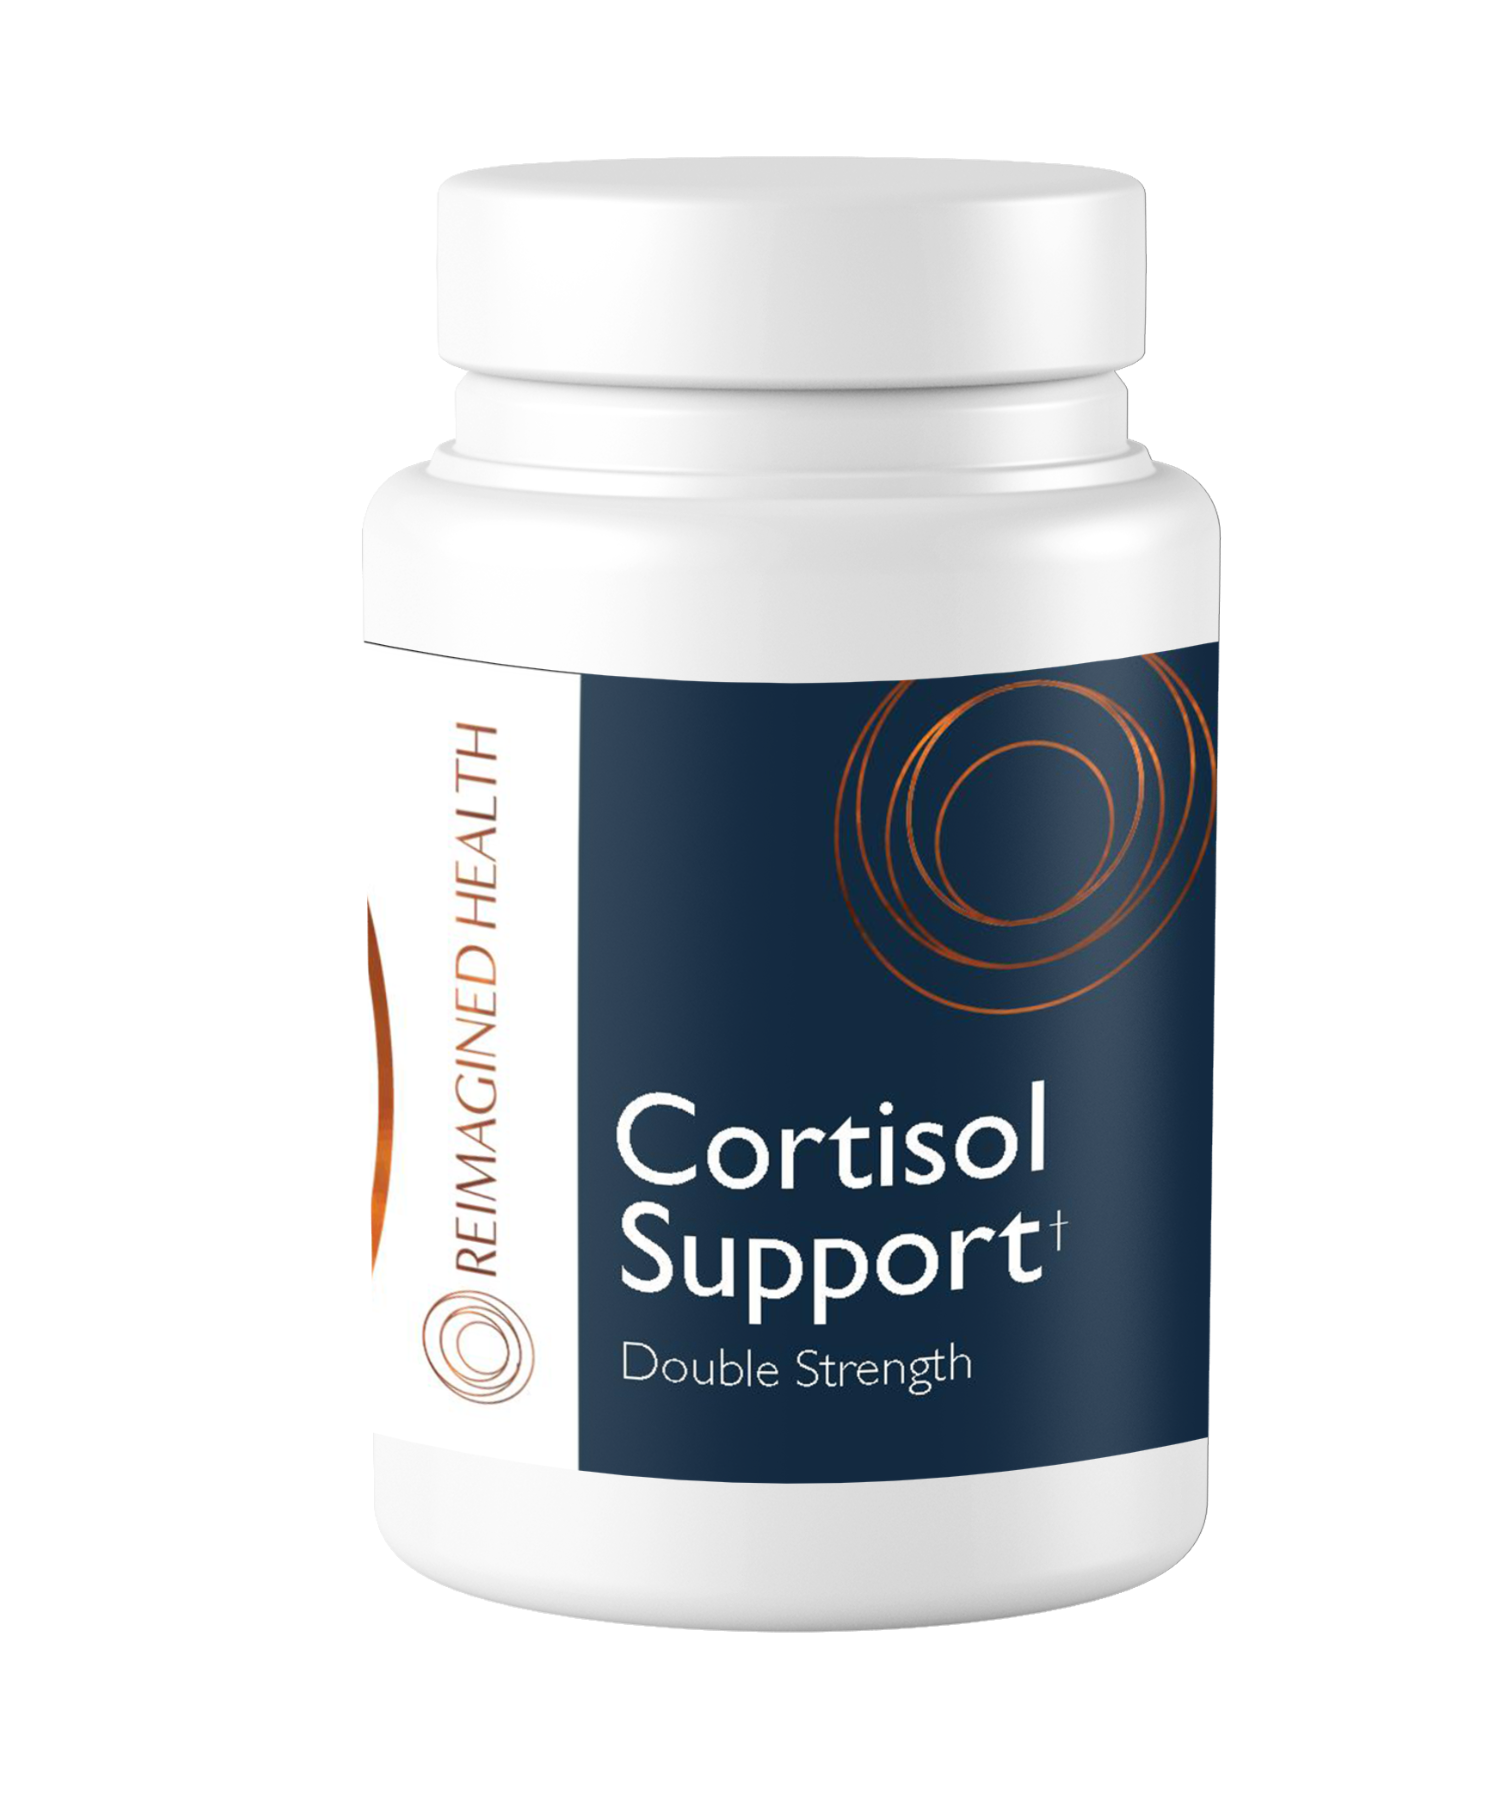 Cortisol-Support-C236-1-1.png